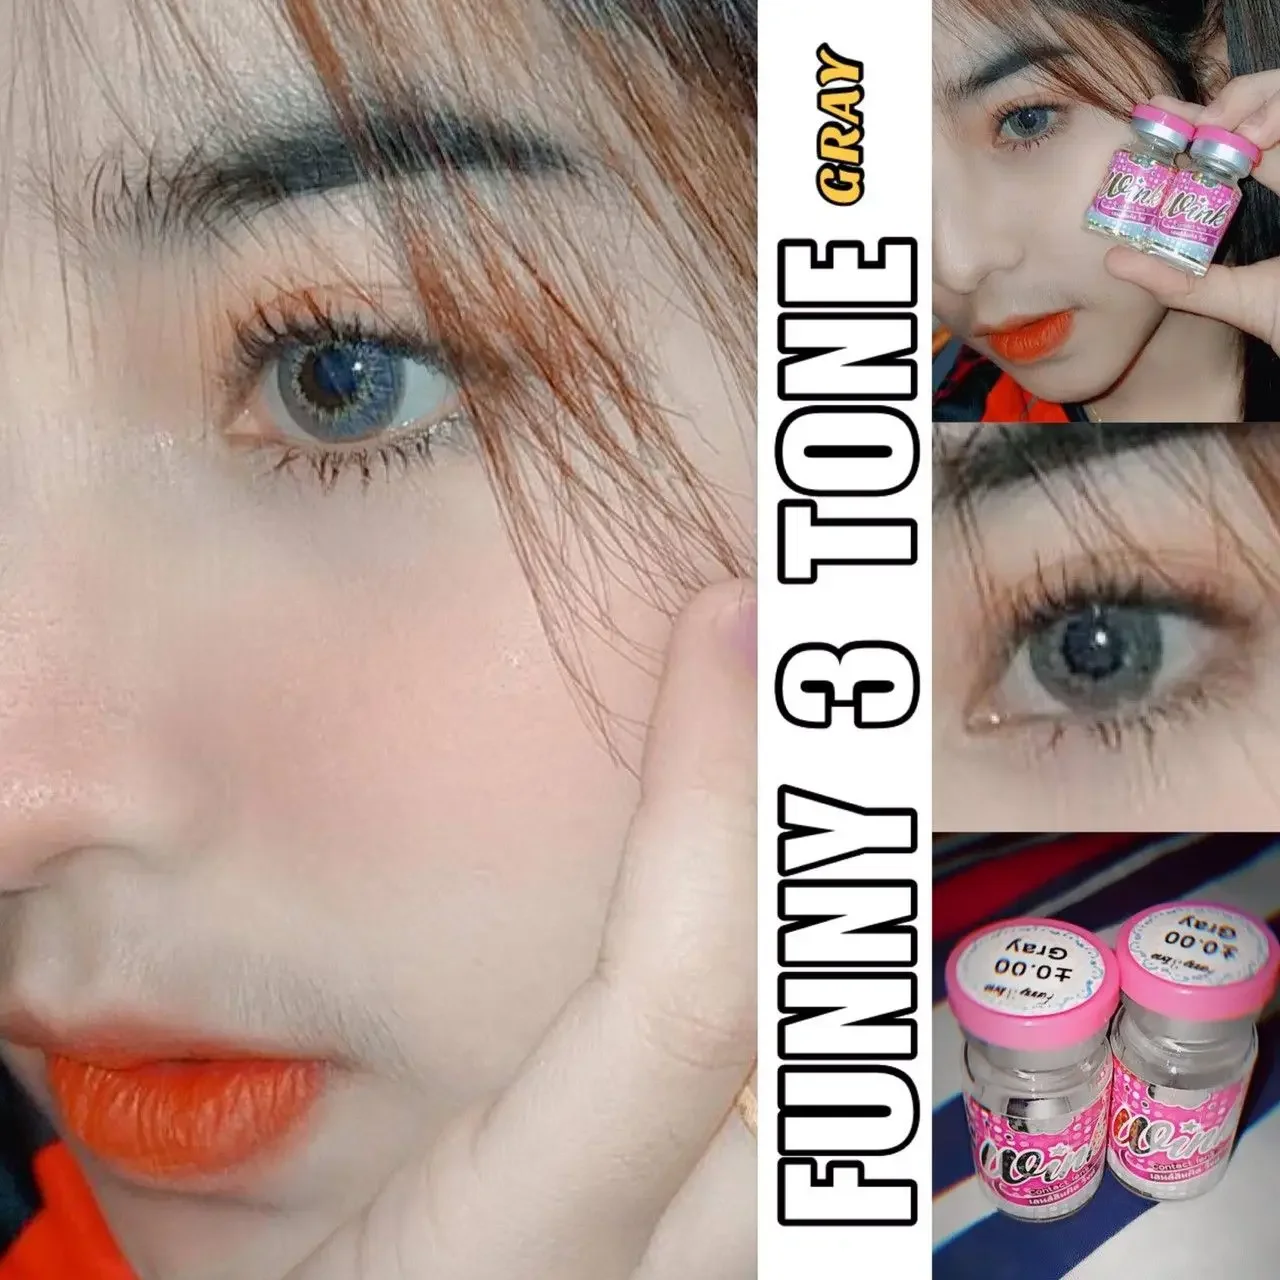 Funny3Tone Gray 16mm Plano Wink Contact Lens